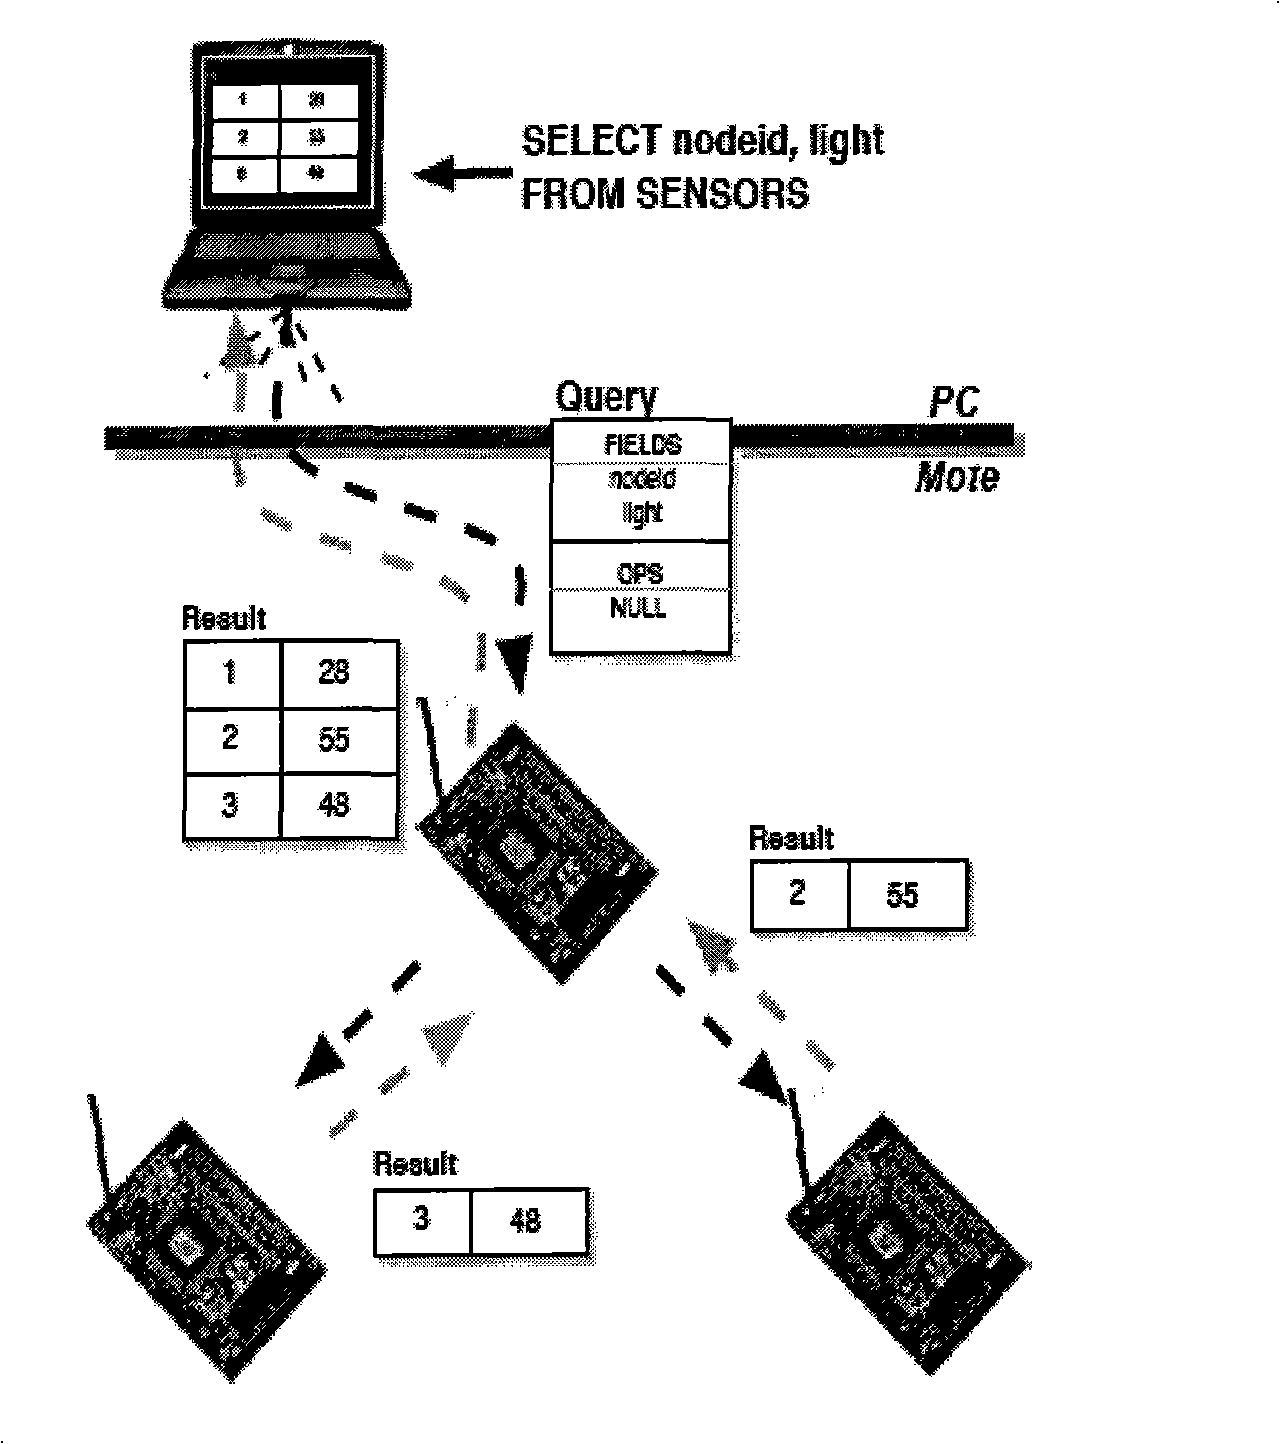 Route switching method for implementing wireless sensor network data query